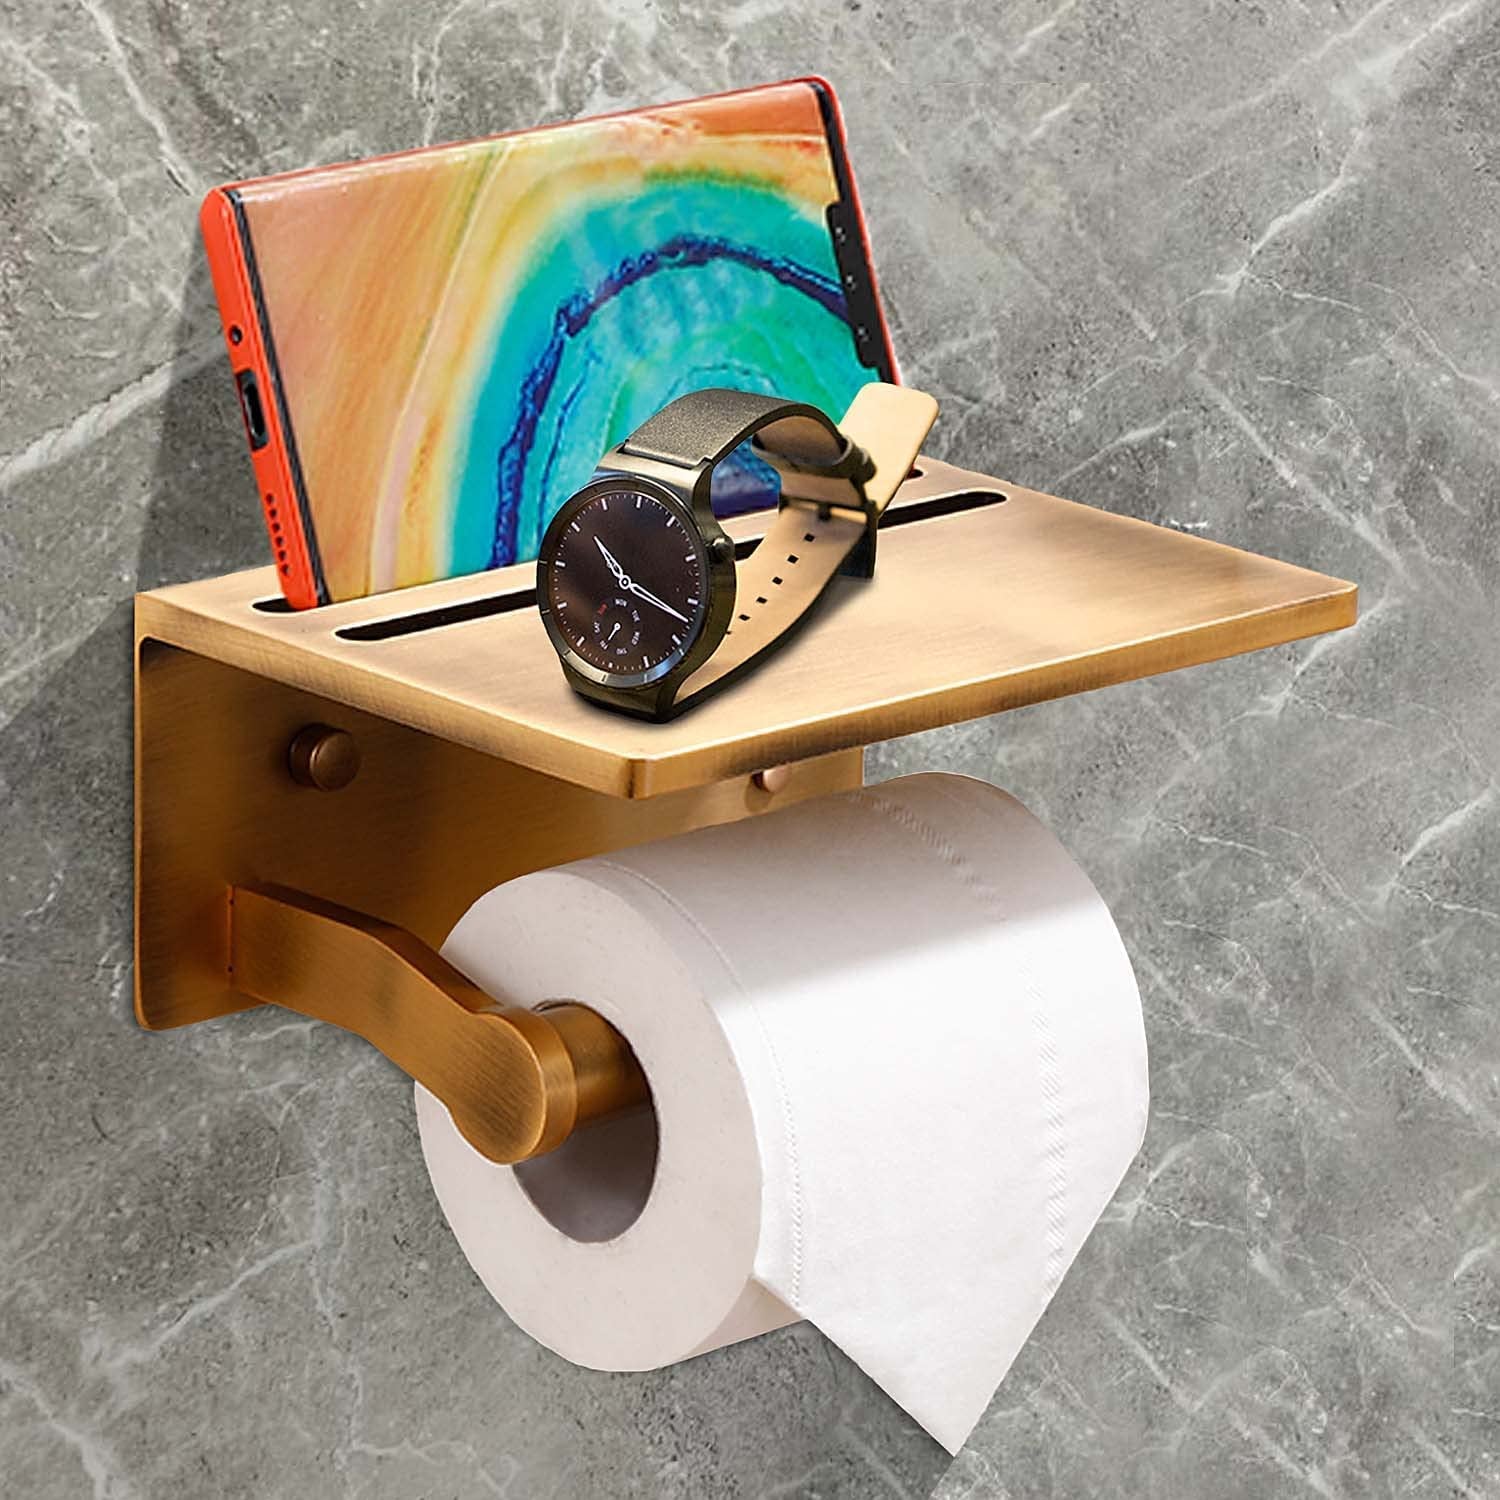 Smarthome Toilet Paper Holder with Shelf, Aluminum Tissue Roll Dispenser with Mobile Phone Storage Shelf for Bathroom, 3M Self Adhesiv or Wall-Mounted with Screws, Antique Brass